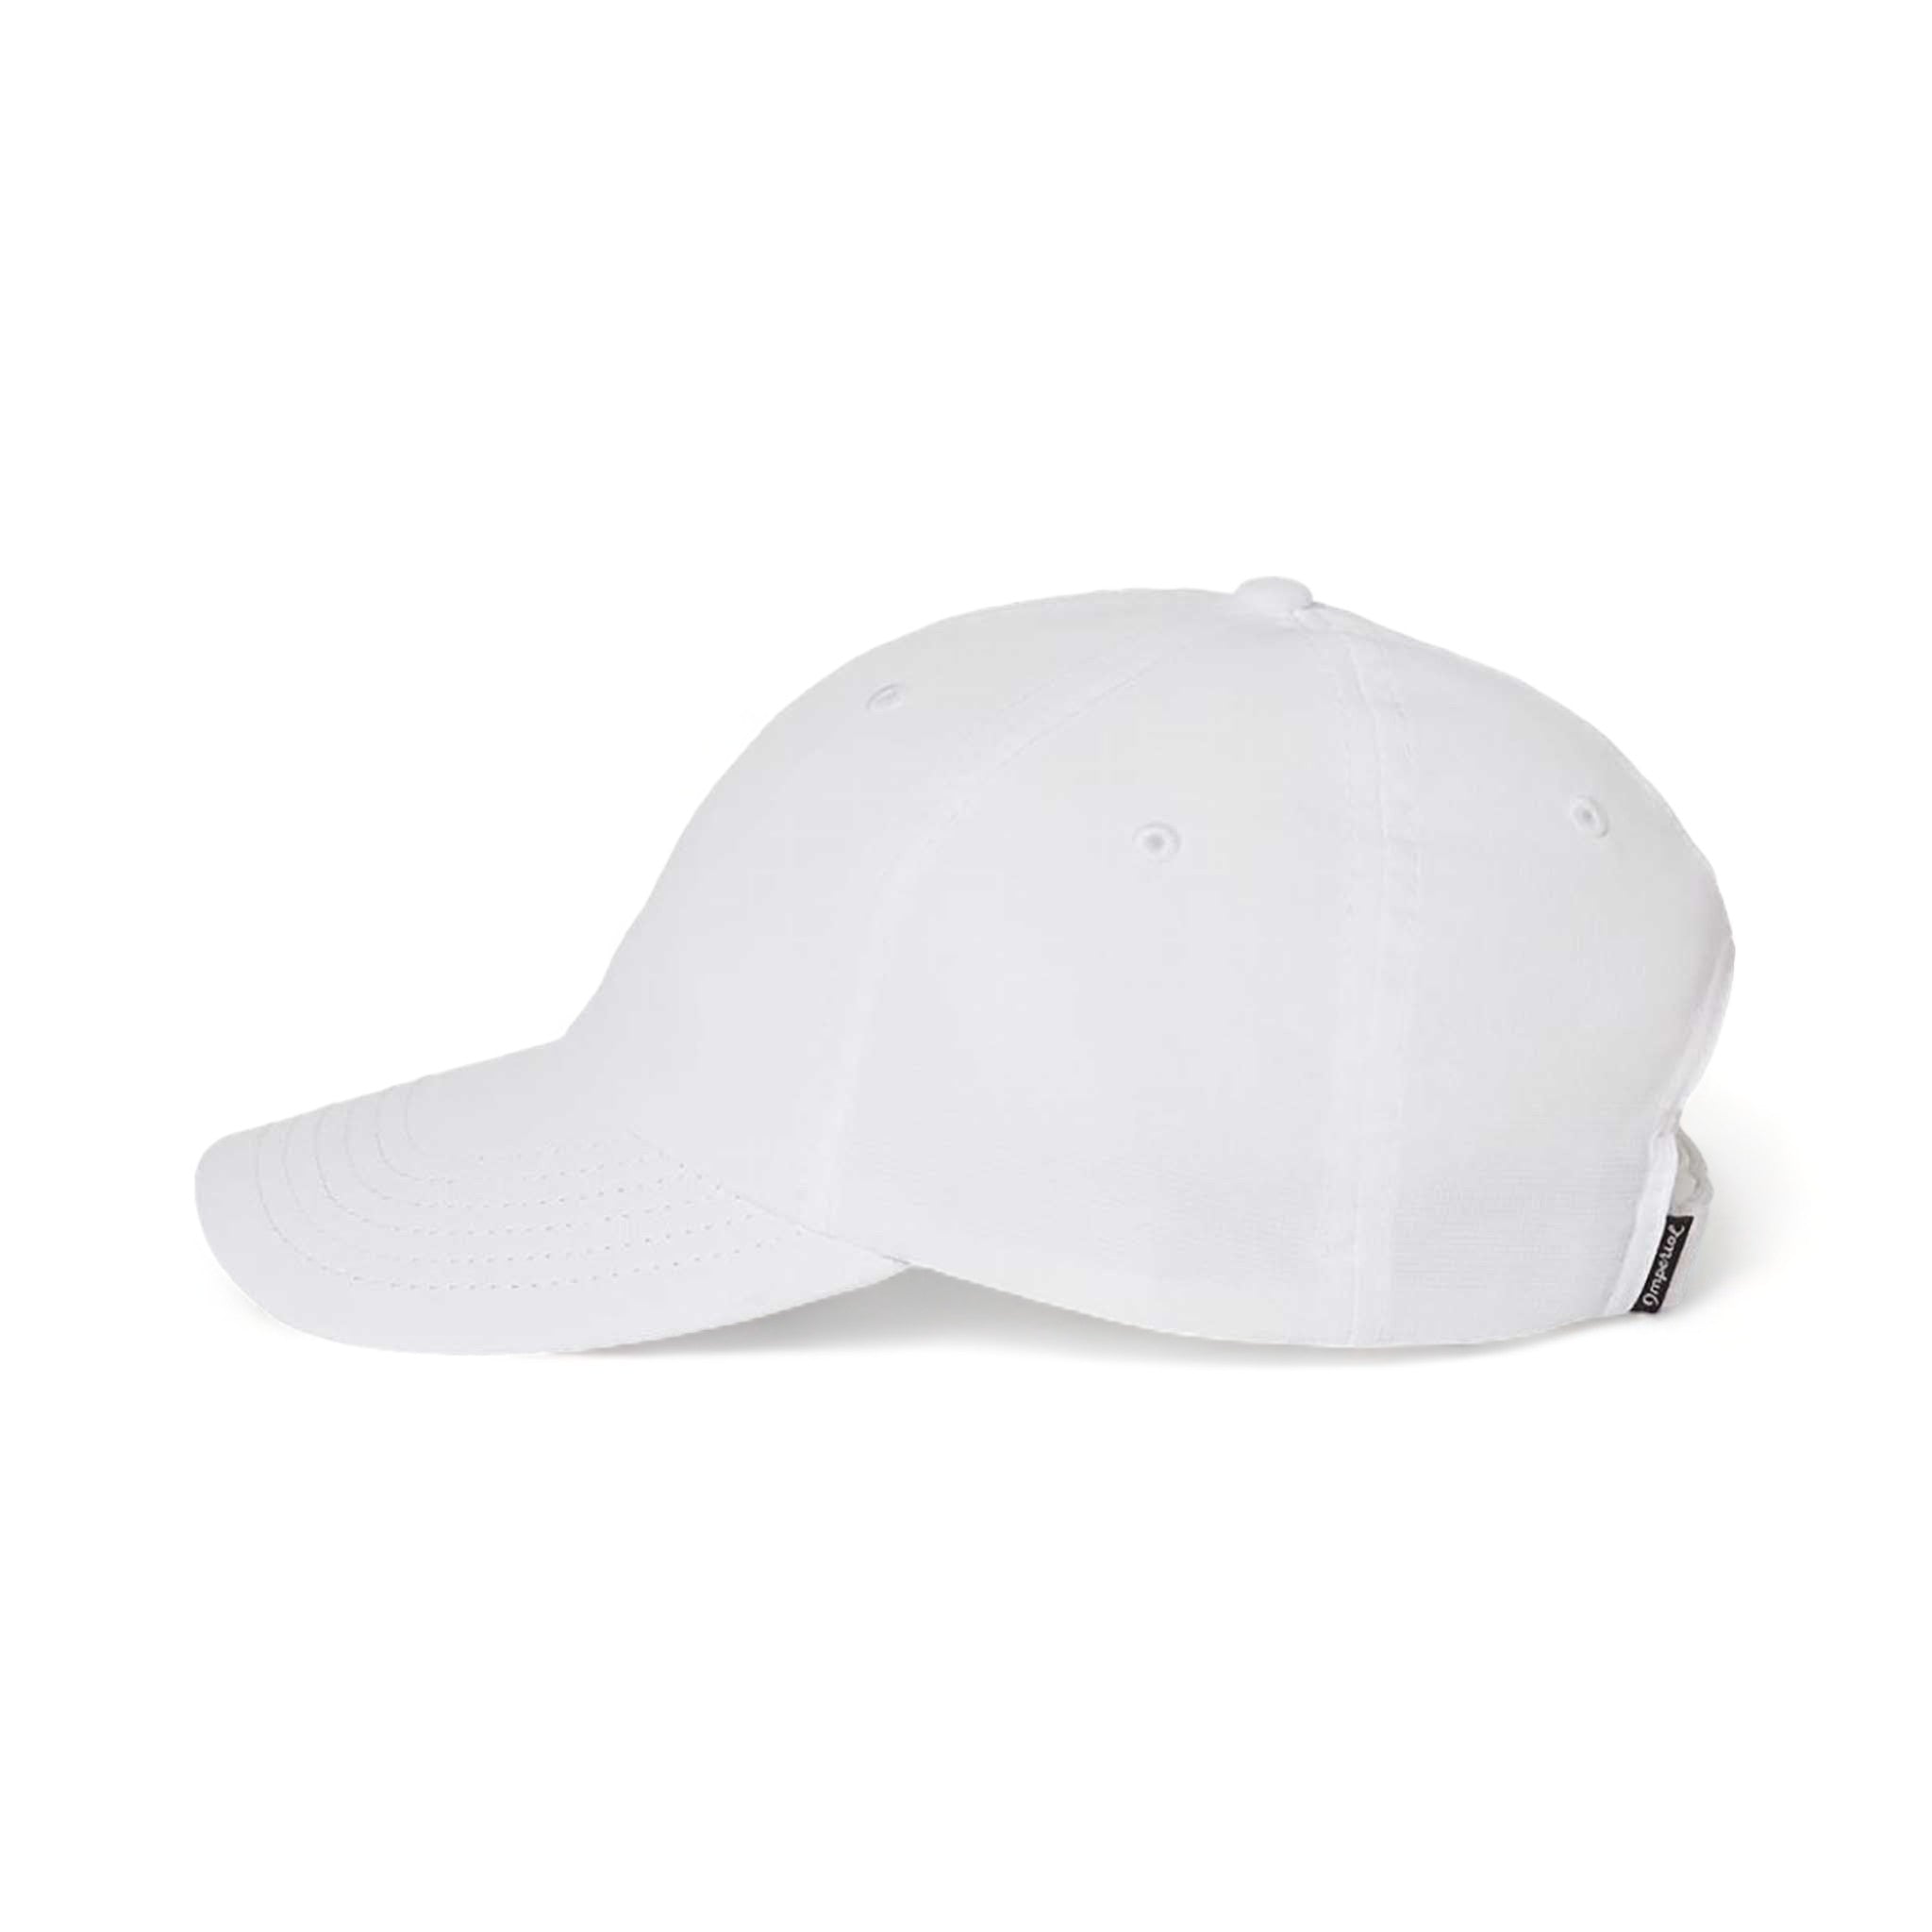 Side view of Imperial X210P custom hat in white